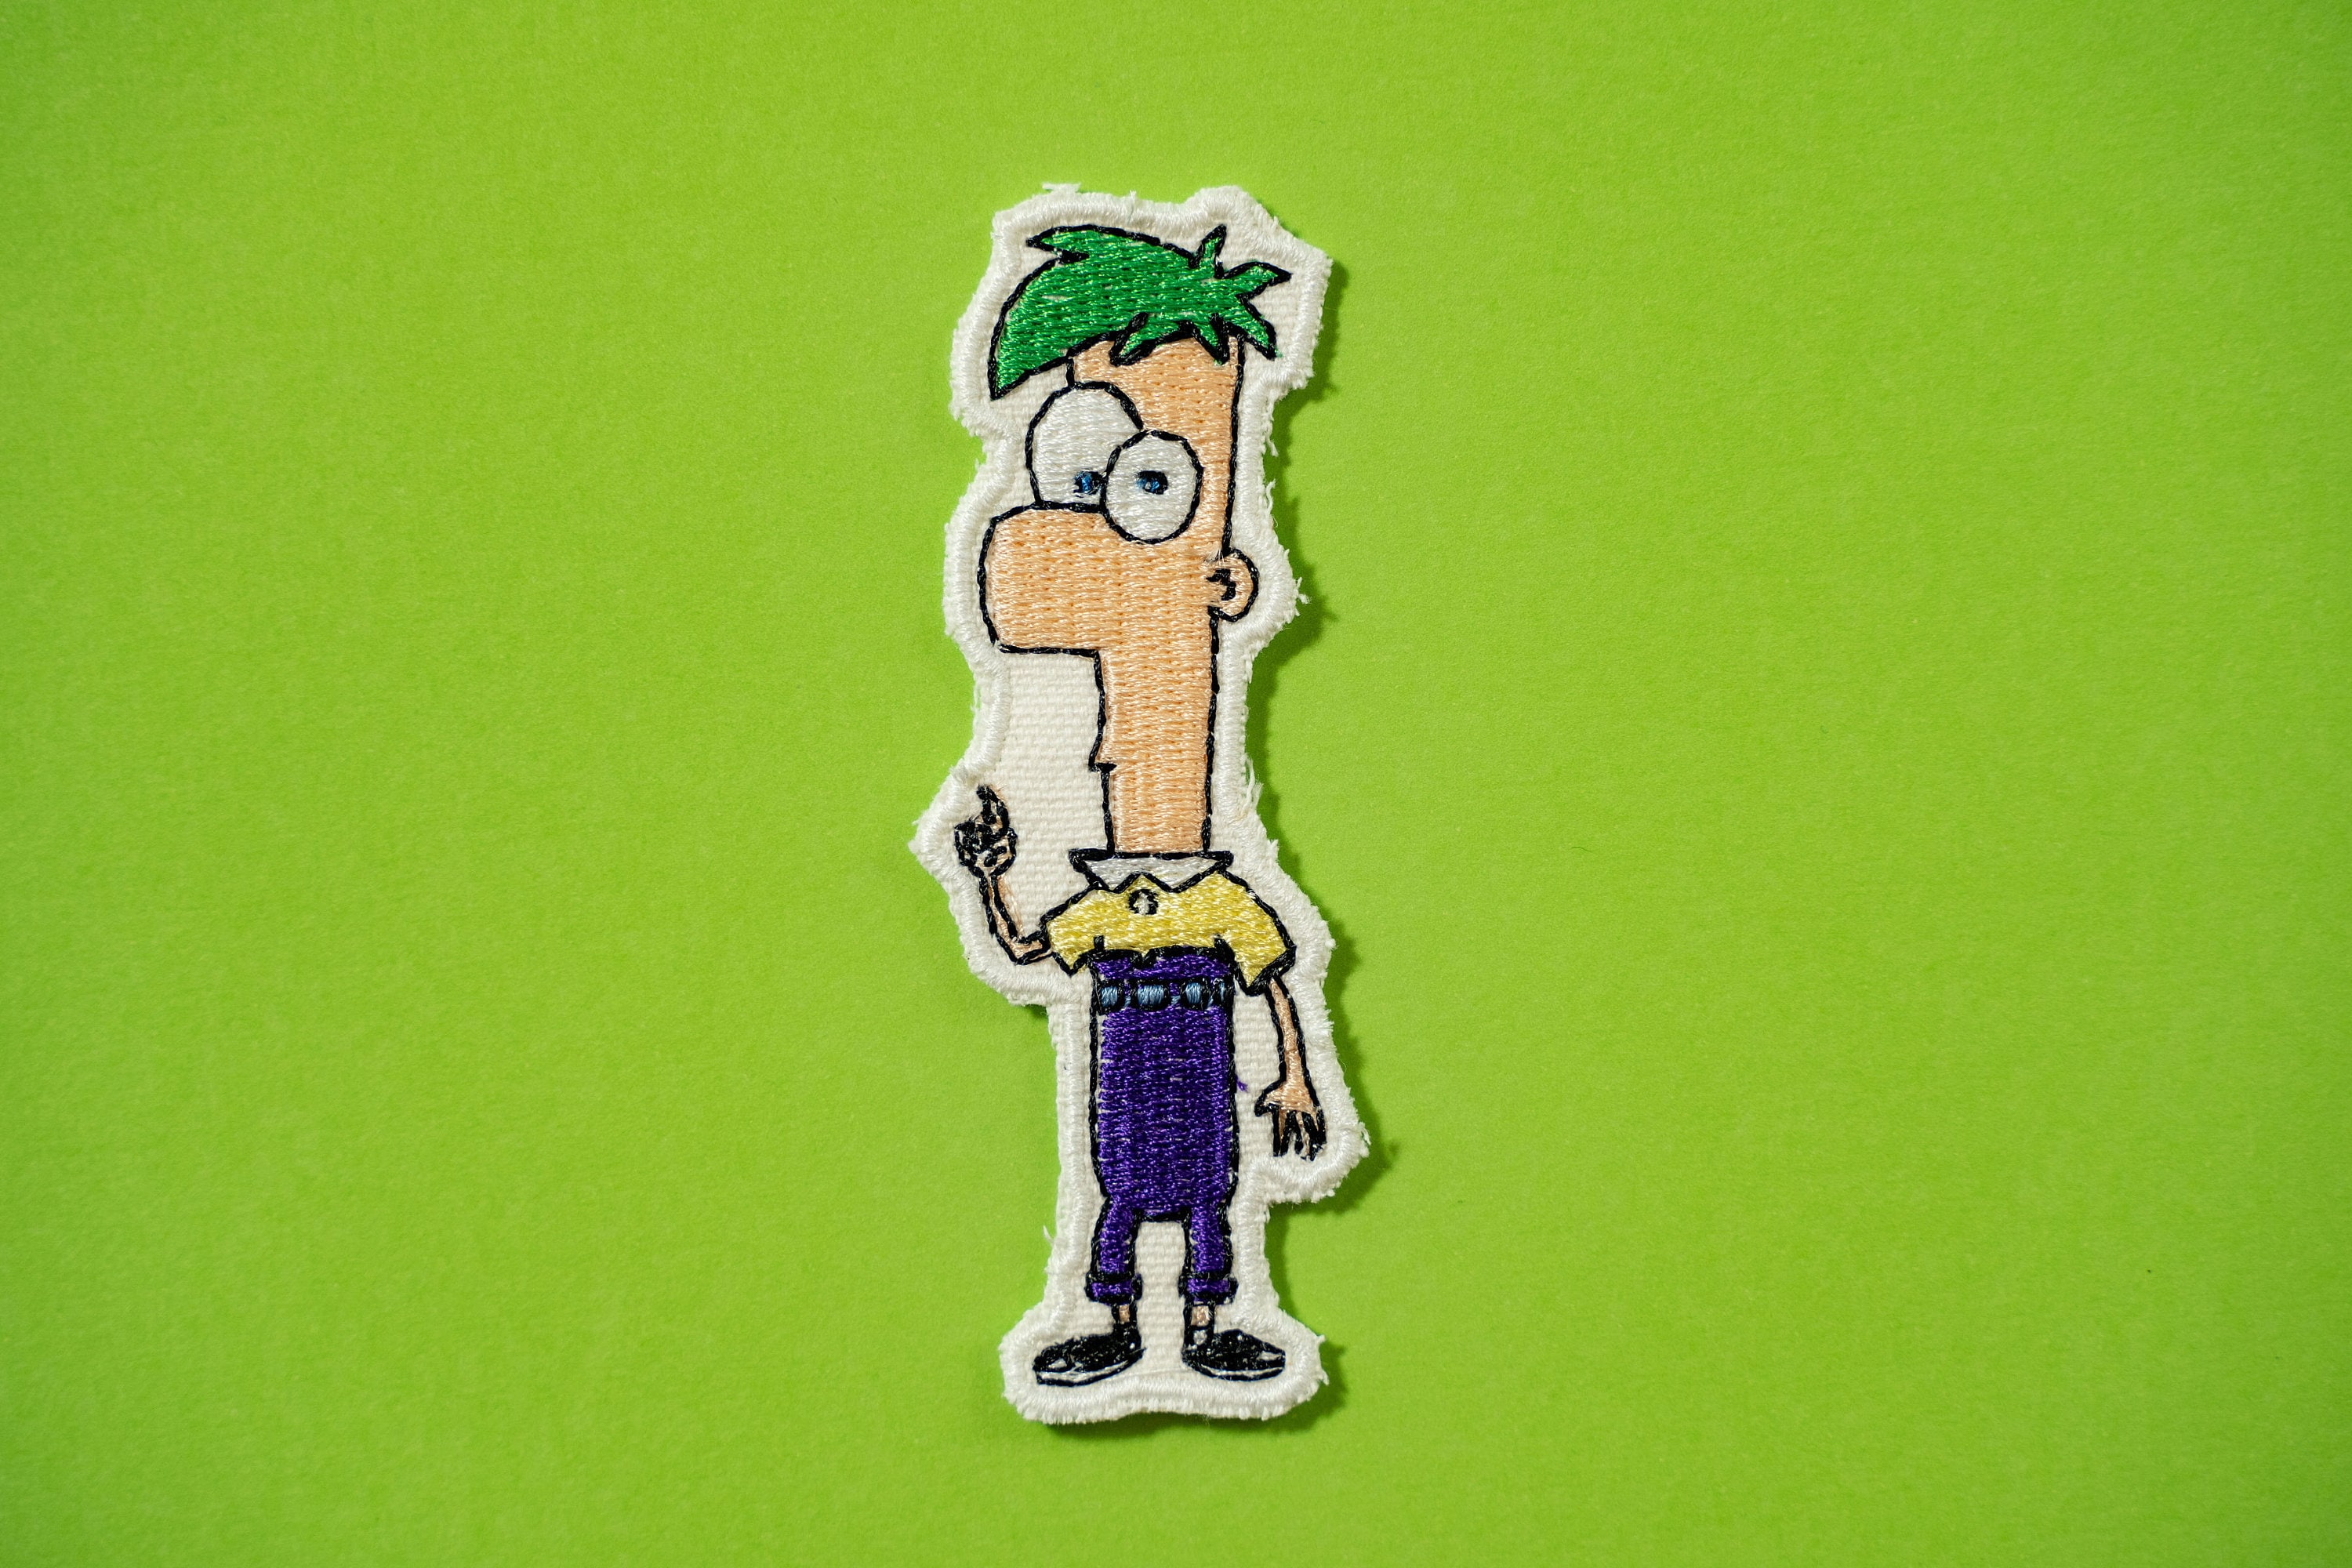 Meep Disney Phineas and Ferb Iron on or Sew on Patch 